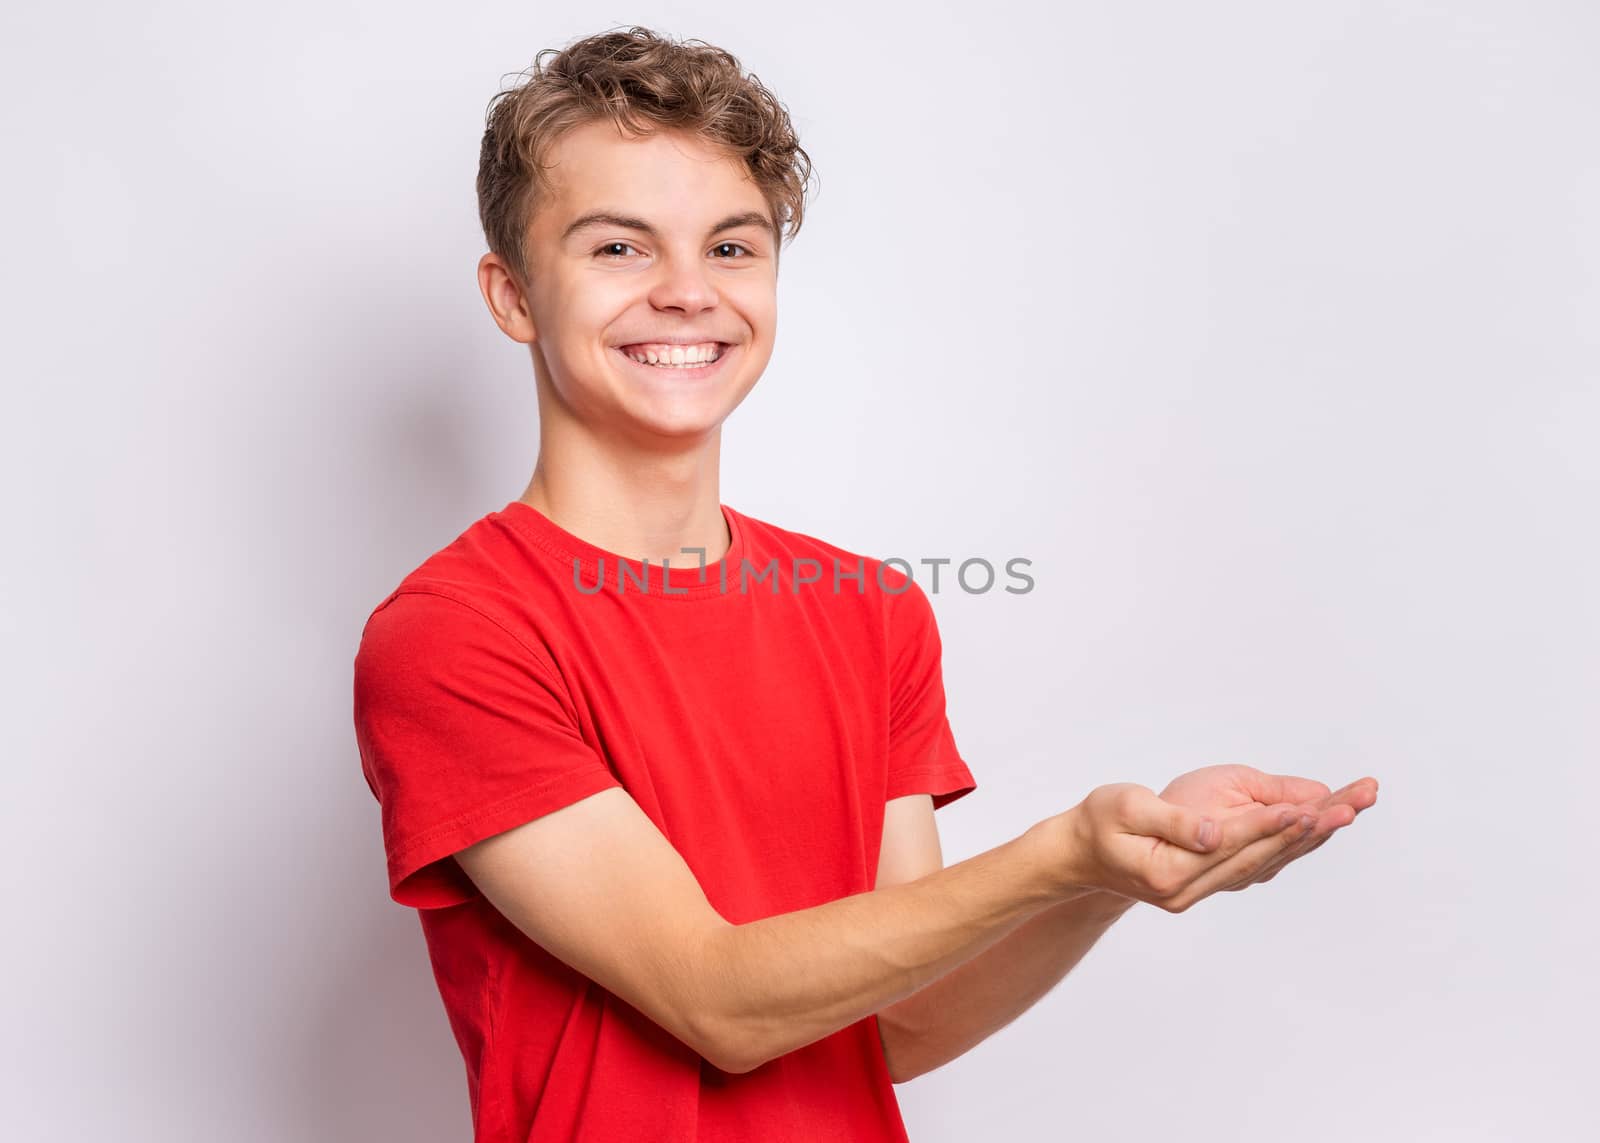 Portrait of cute smiling teen boy holding nothing - side view. Happy teenager with empty palms up - profile, over grey background. Child stretched out his hands - sign of begging or giving.